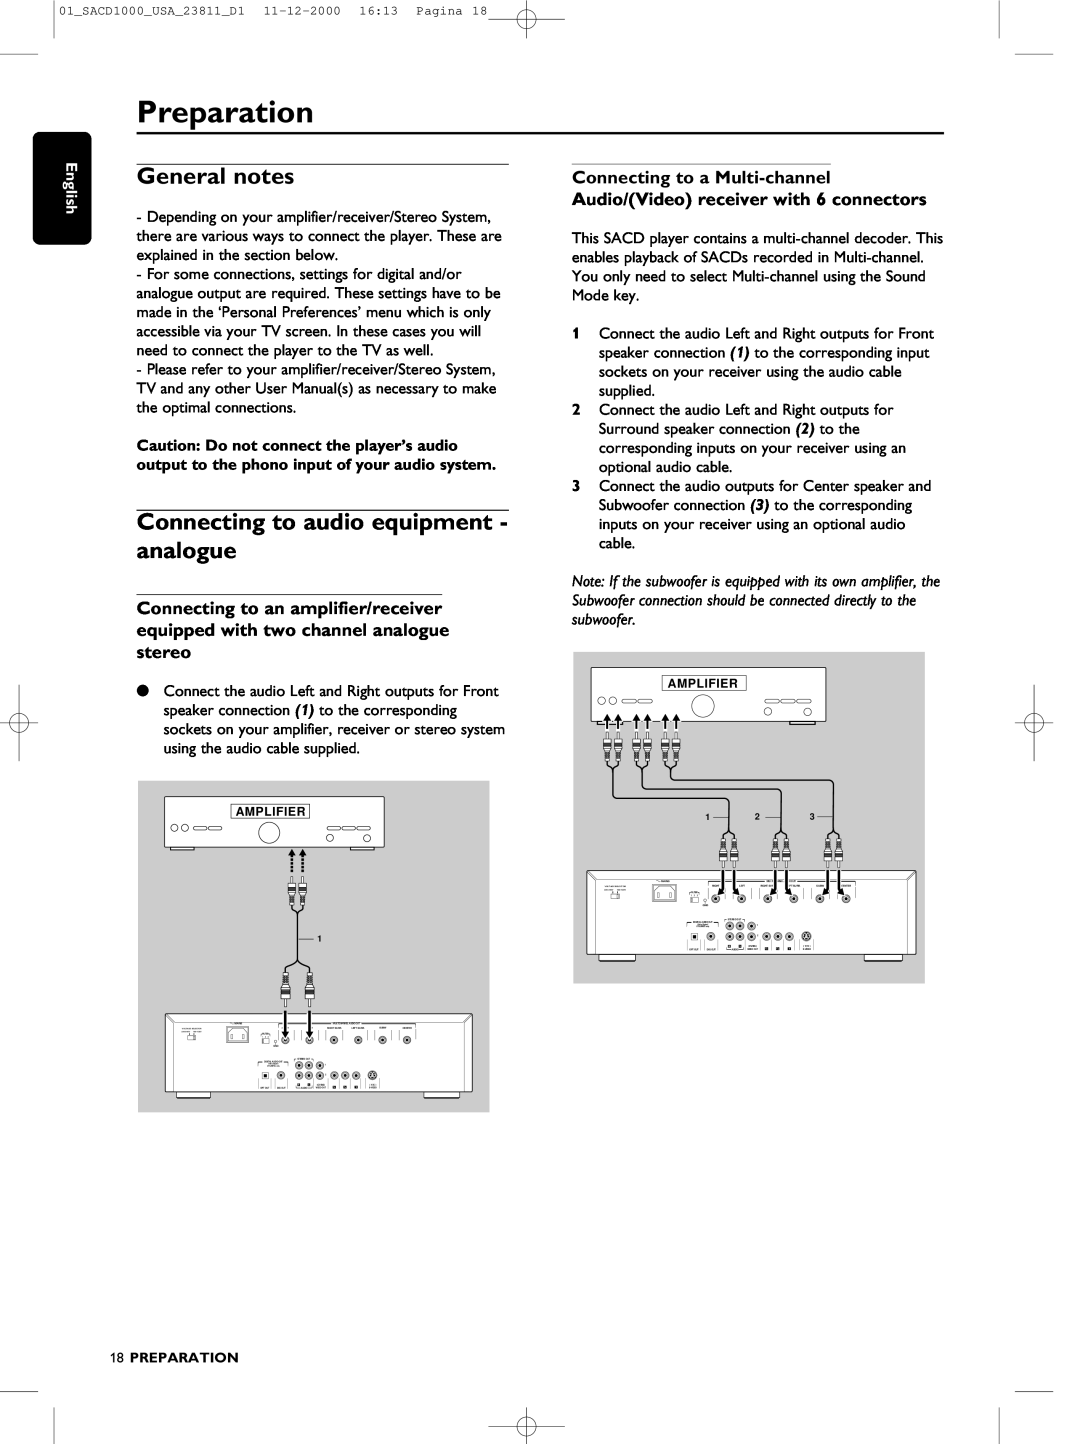 Philips SACD-1000 manual Preparation, General notes, Connecting to audio equipment - analogue 